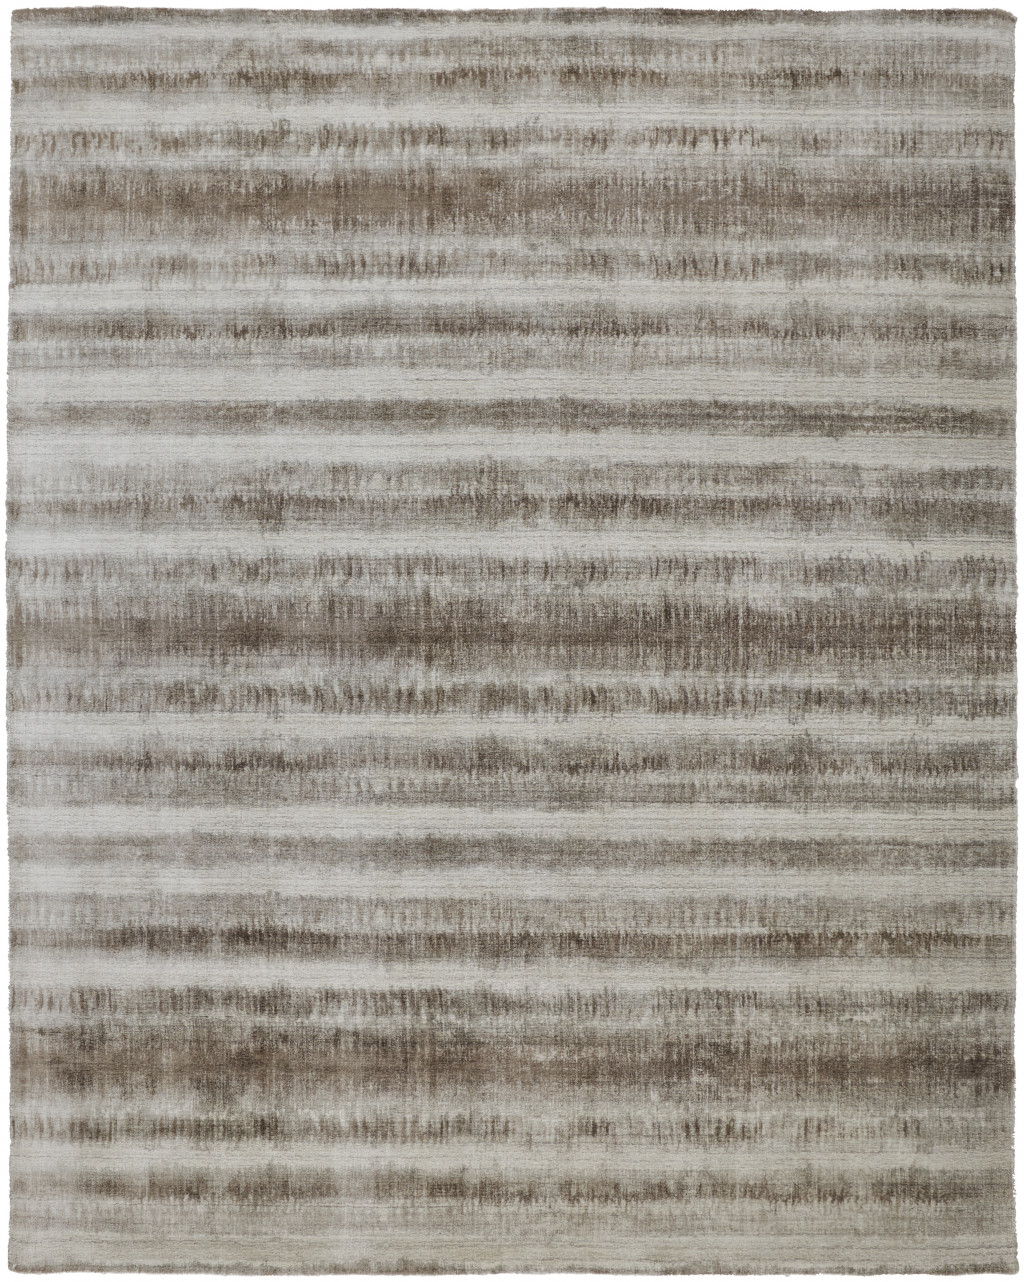 8' X 10' Tan Ivory And Brown Abstract Hand Woven Area Rug-514437-1